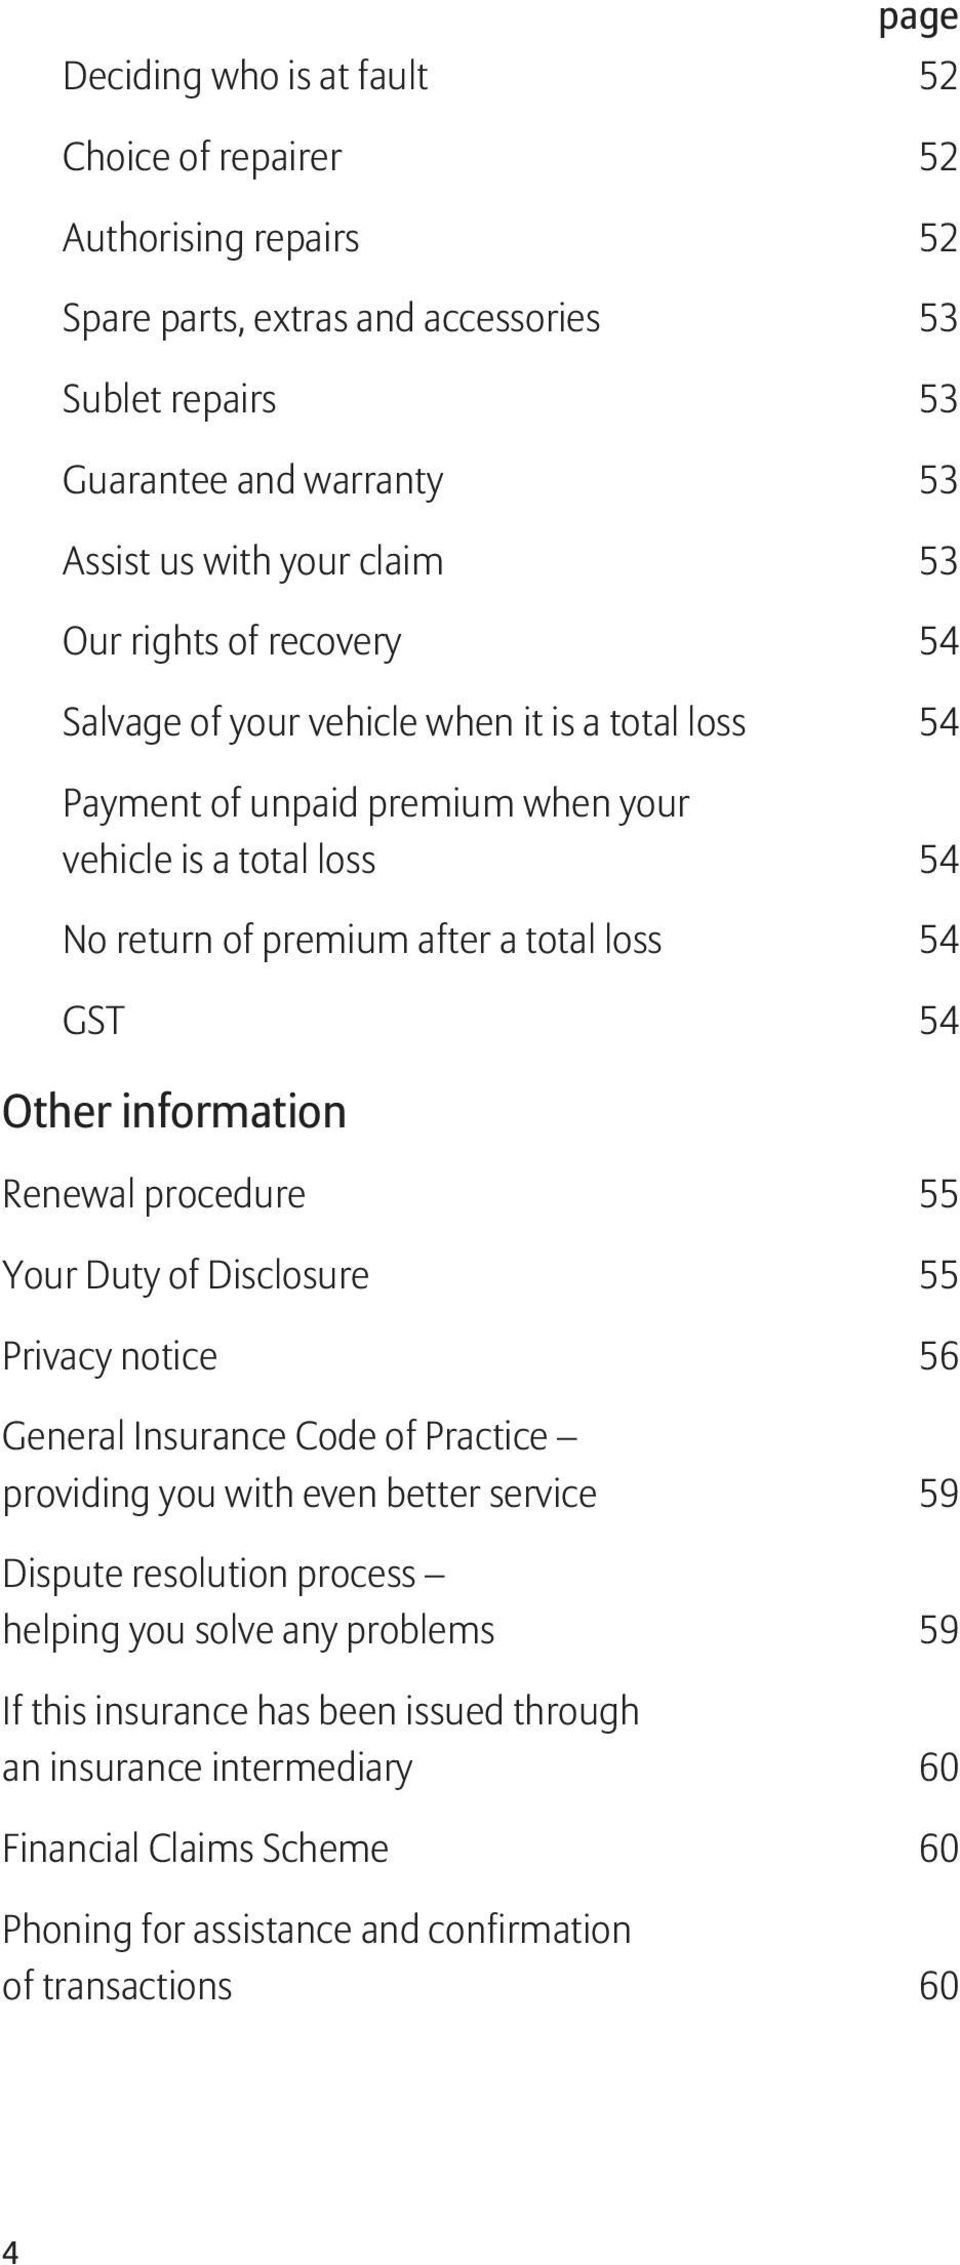 Other information page Renewal procedure 55 Your Duty of Disclosure 55 Privacy notice 56 General Insurance Code of Practice providing you with even better service 59 Dispute resolution